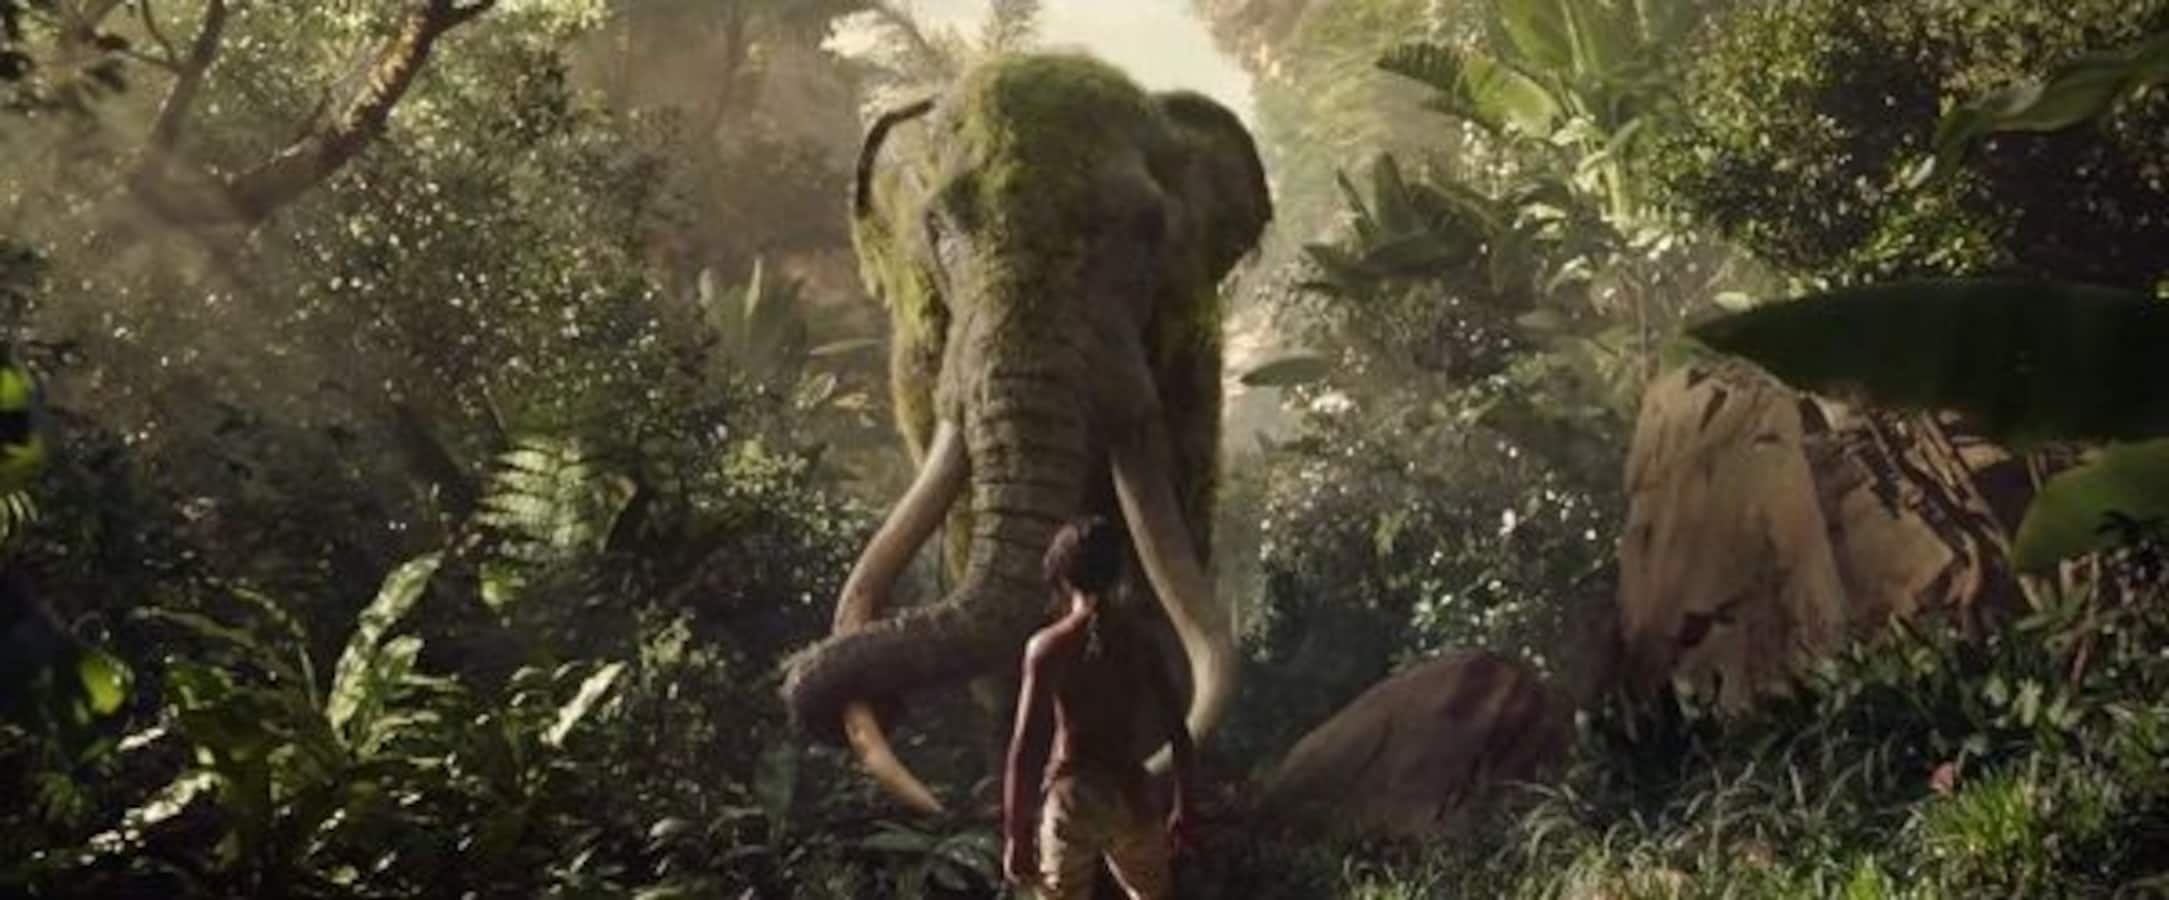 Mowgli trailer: This darker retelling of The Jungle Book featuring  Christian Bale, Benedict Cumberbatch looks engaging - watch video -  Bollywood News & Gossip, Movie Reviews, Trailers & Videos at  